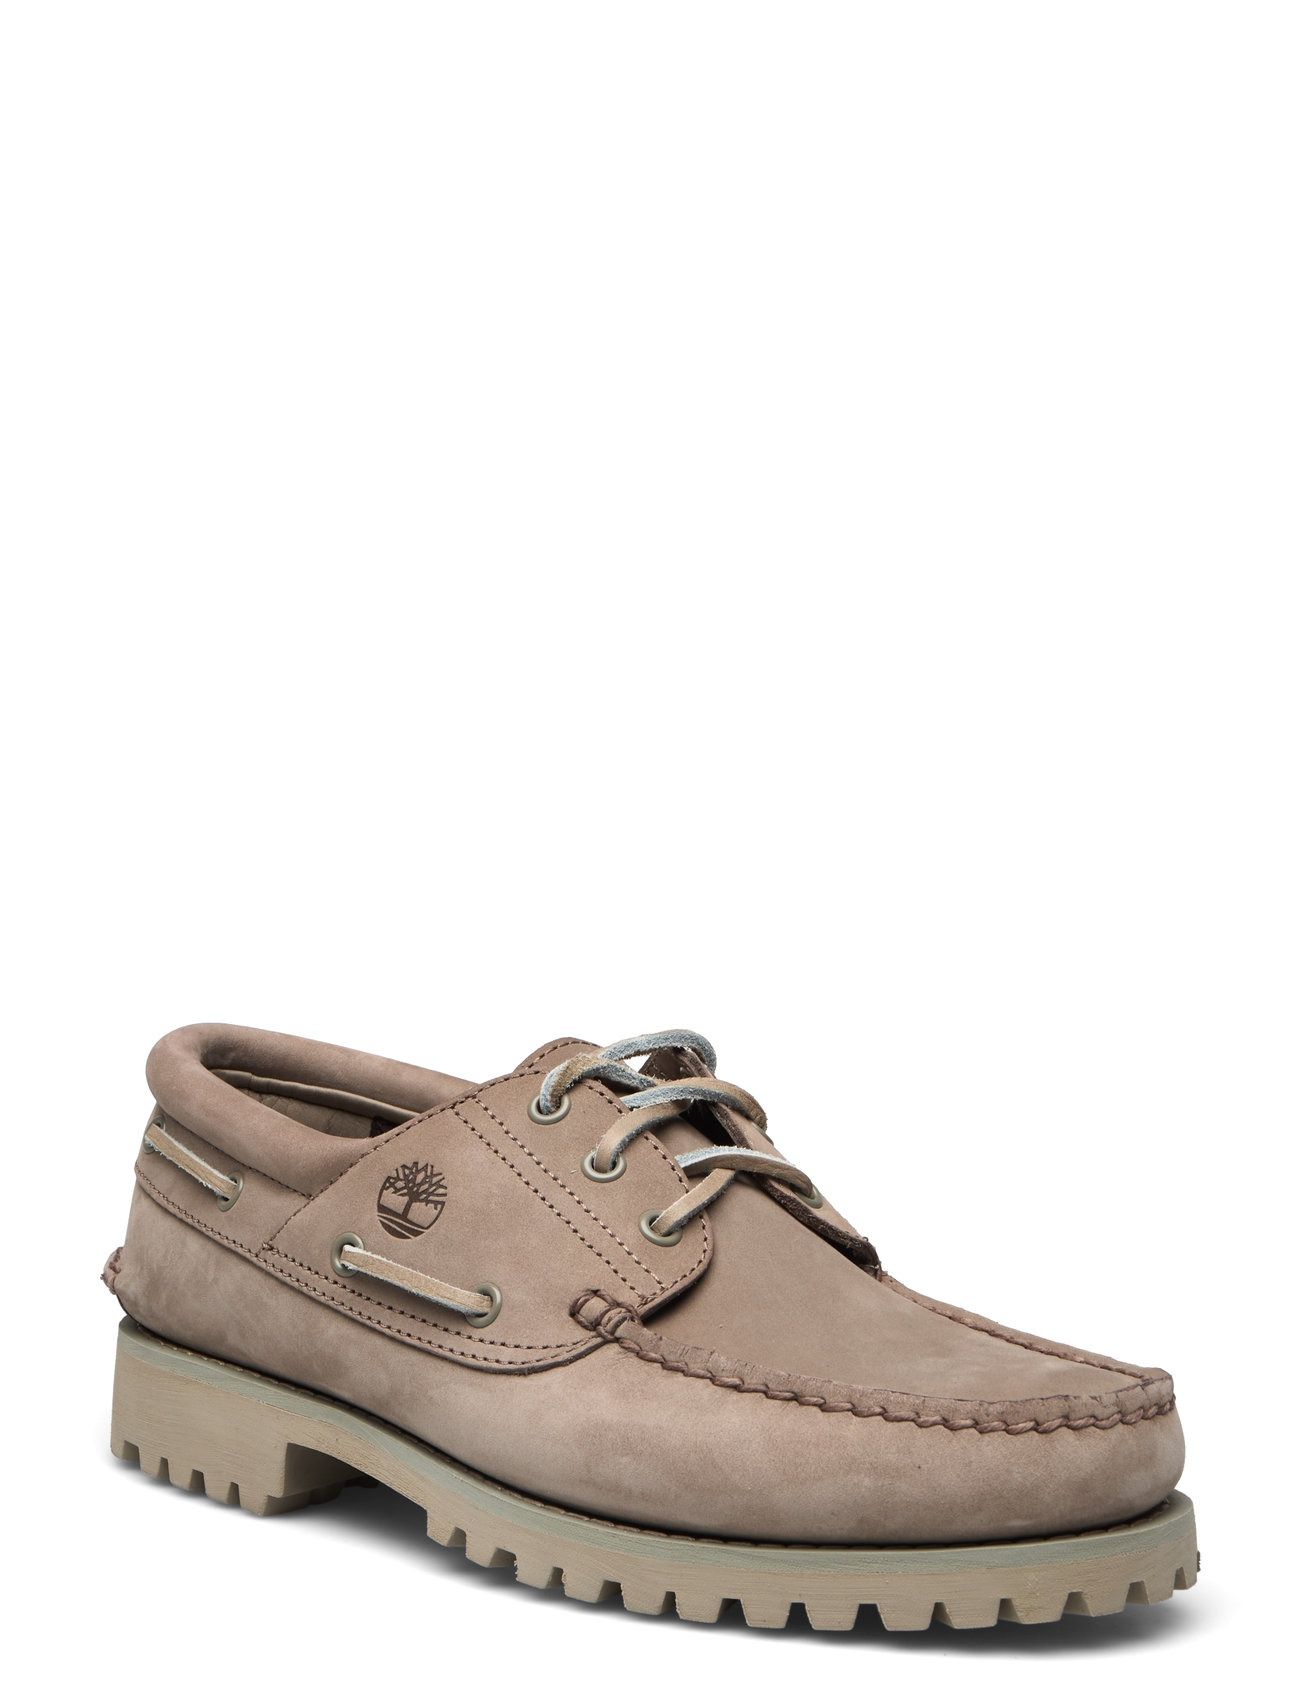 Timberland Authentic Boat Shoe Light Taupe Nubuck Designers Boat Shoes Beige Timberland